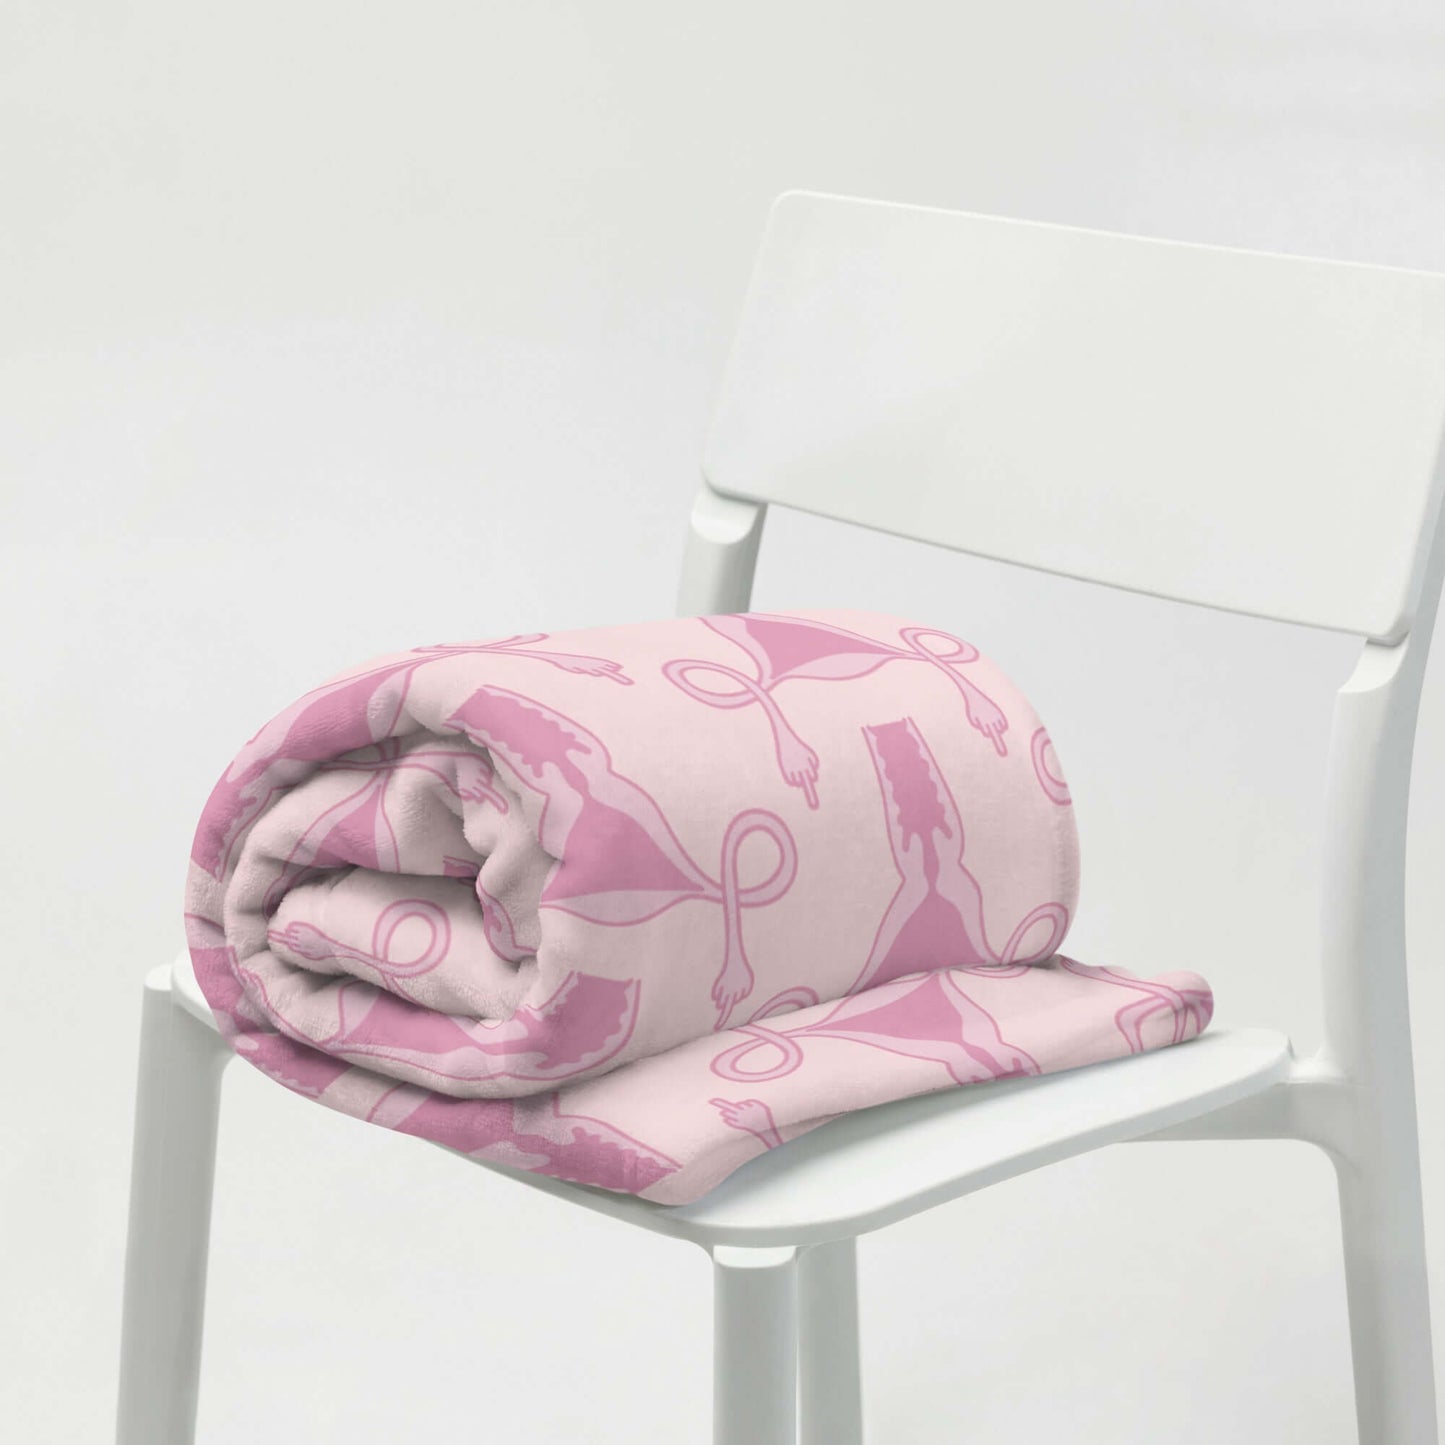 Angry uterus reproductive rights middle finger throw blanket